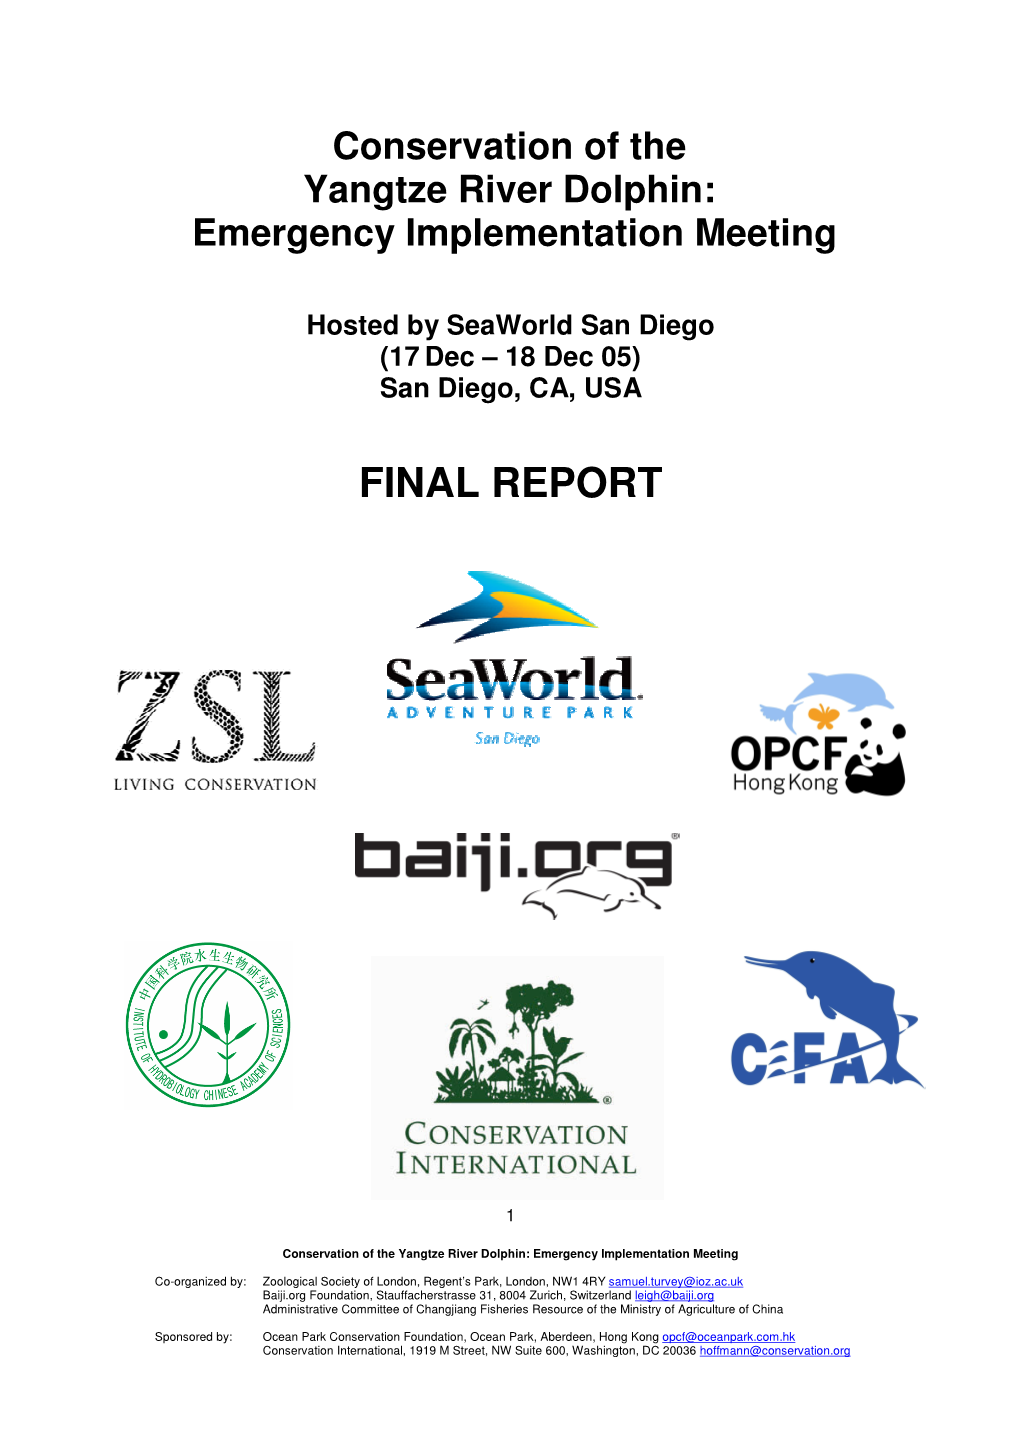 Conservation of the Yangtze River Dolphin: Emergency Implementation Meeting